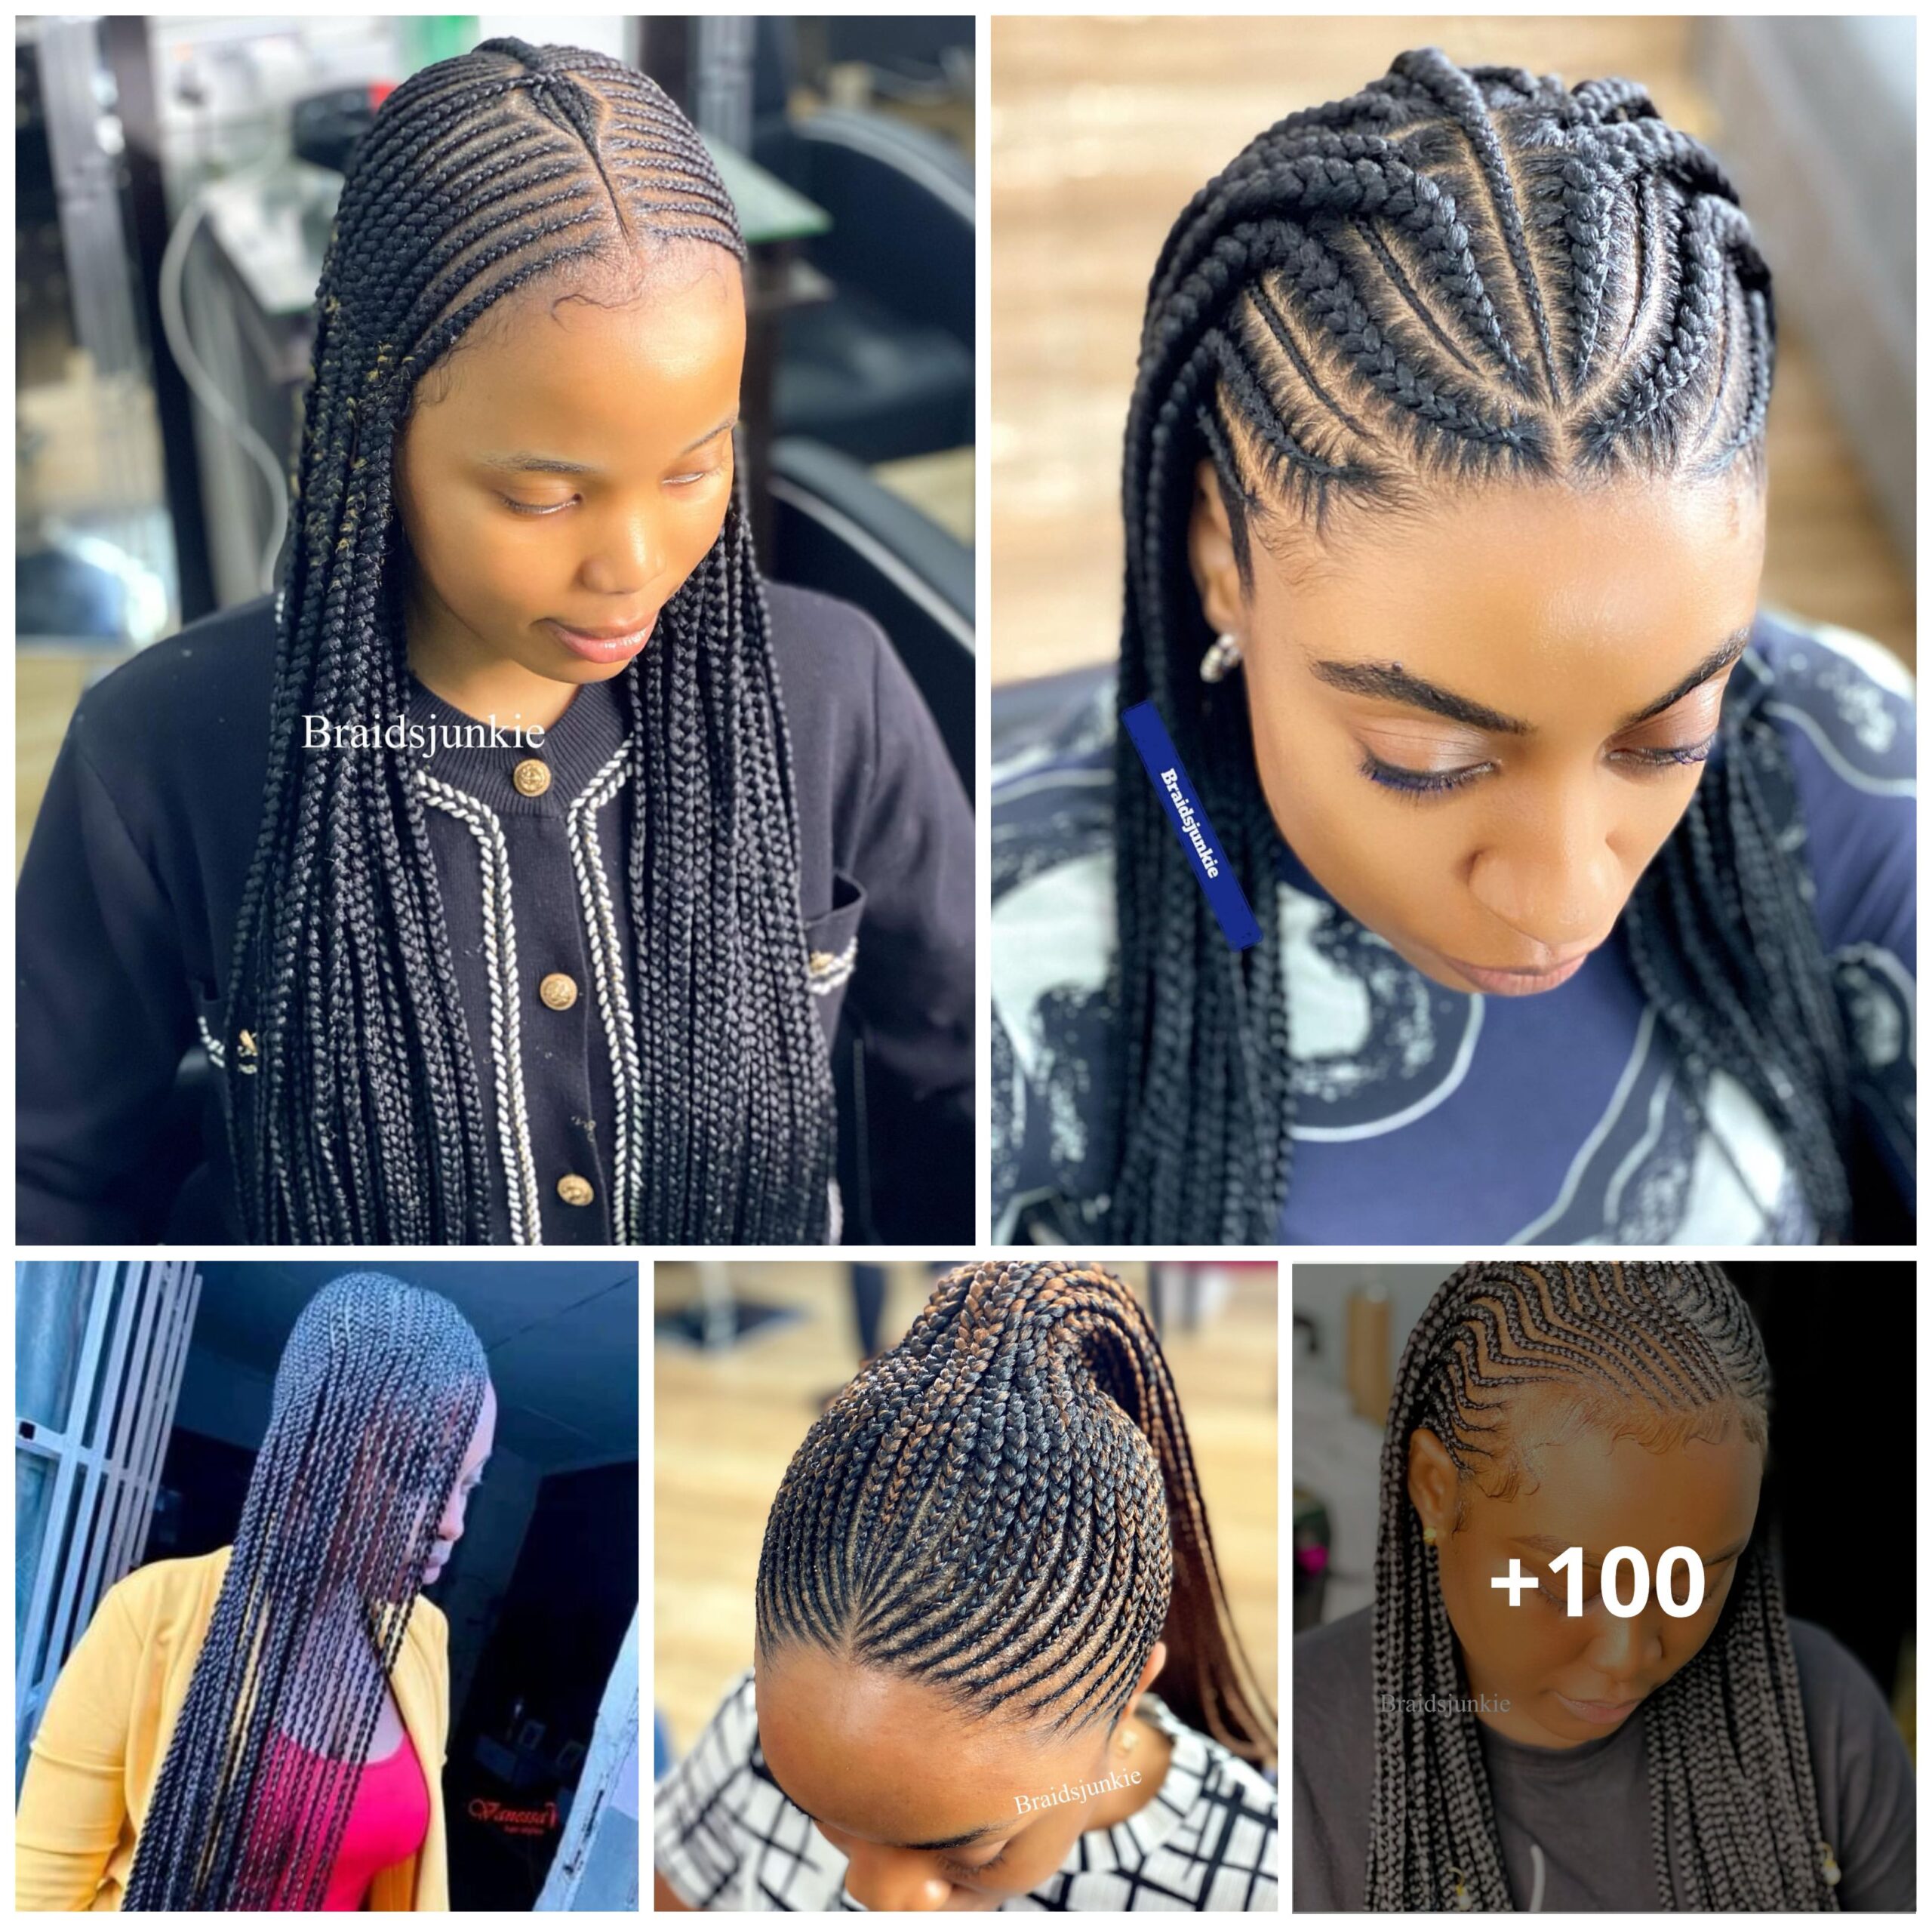 100 Braided Hairstyles That Will Increase Your Self-Confidence